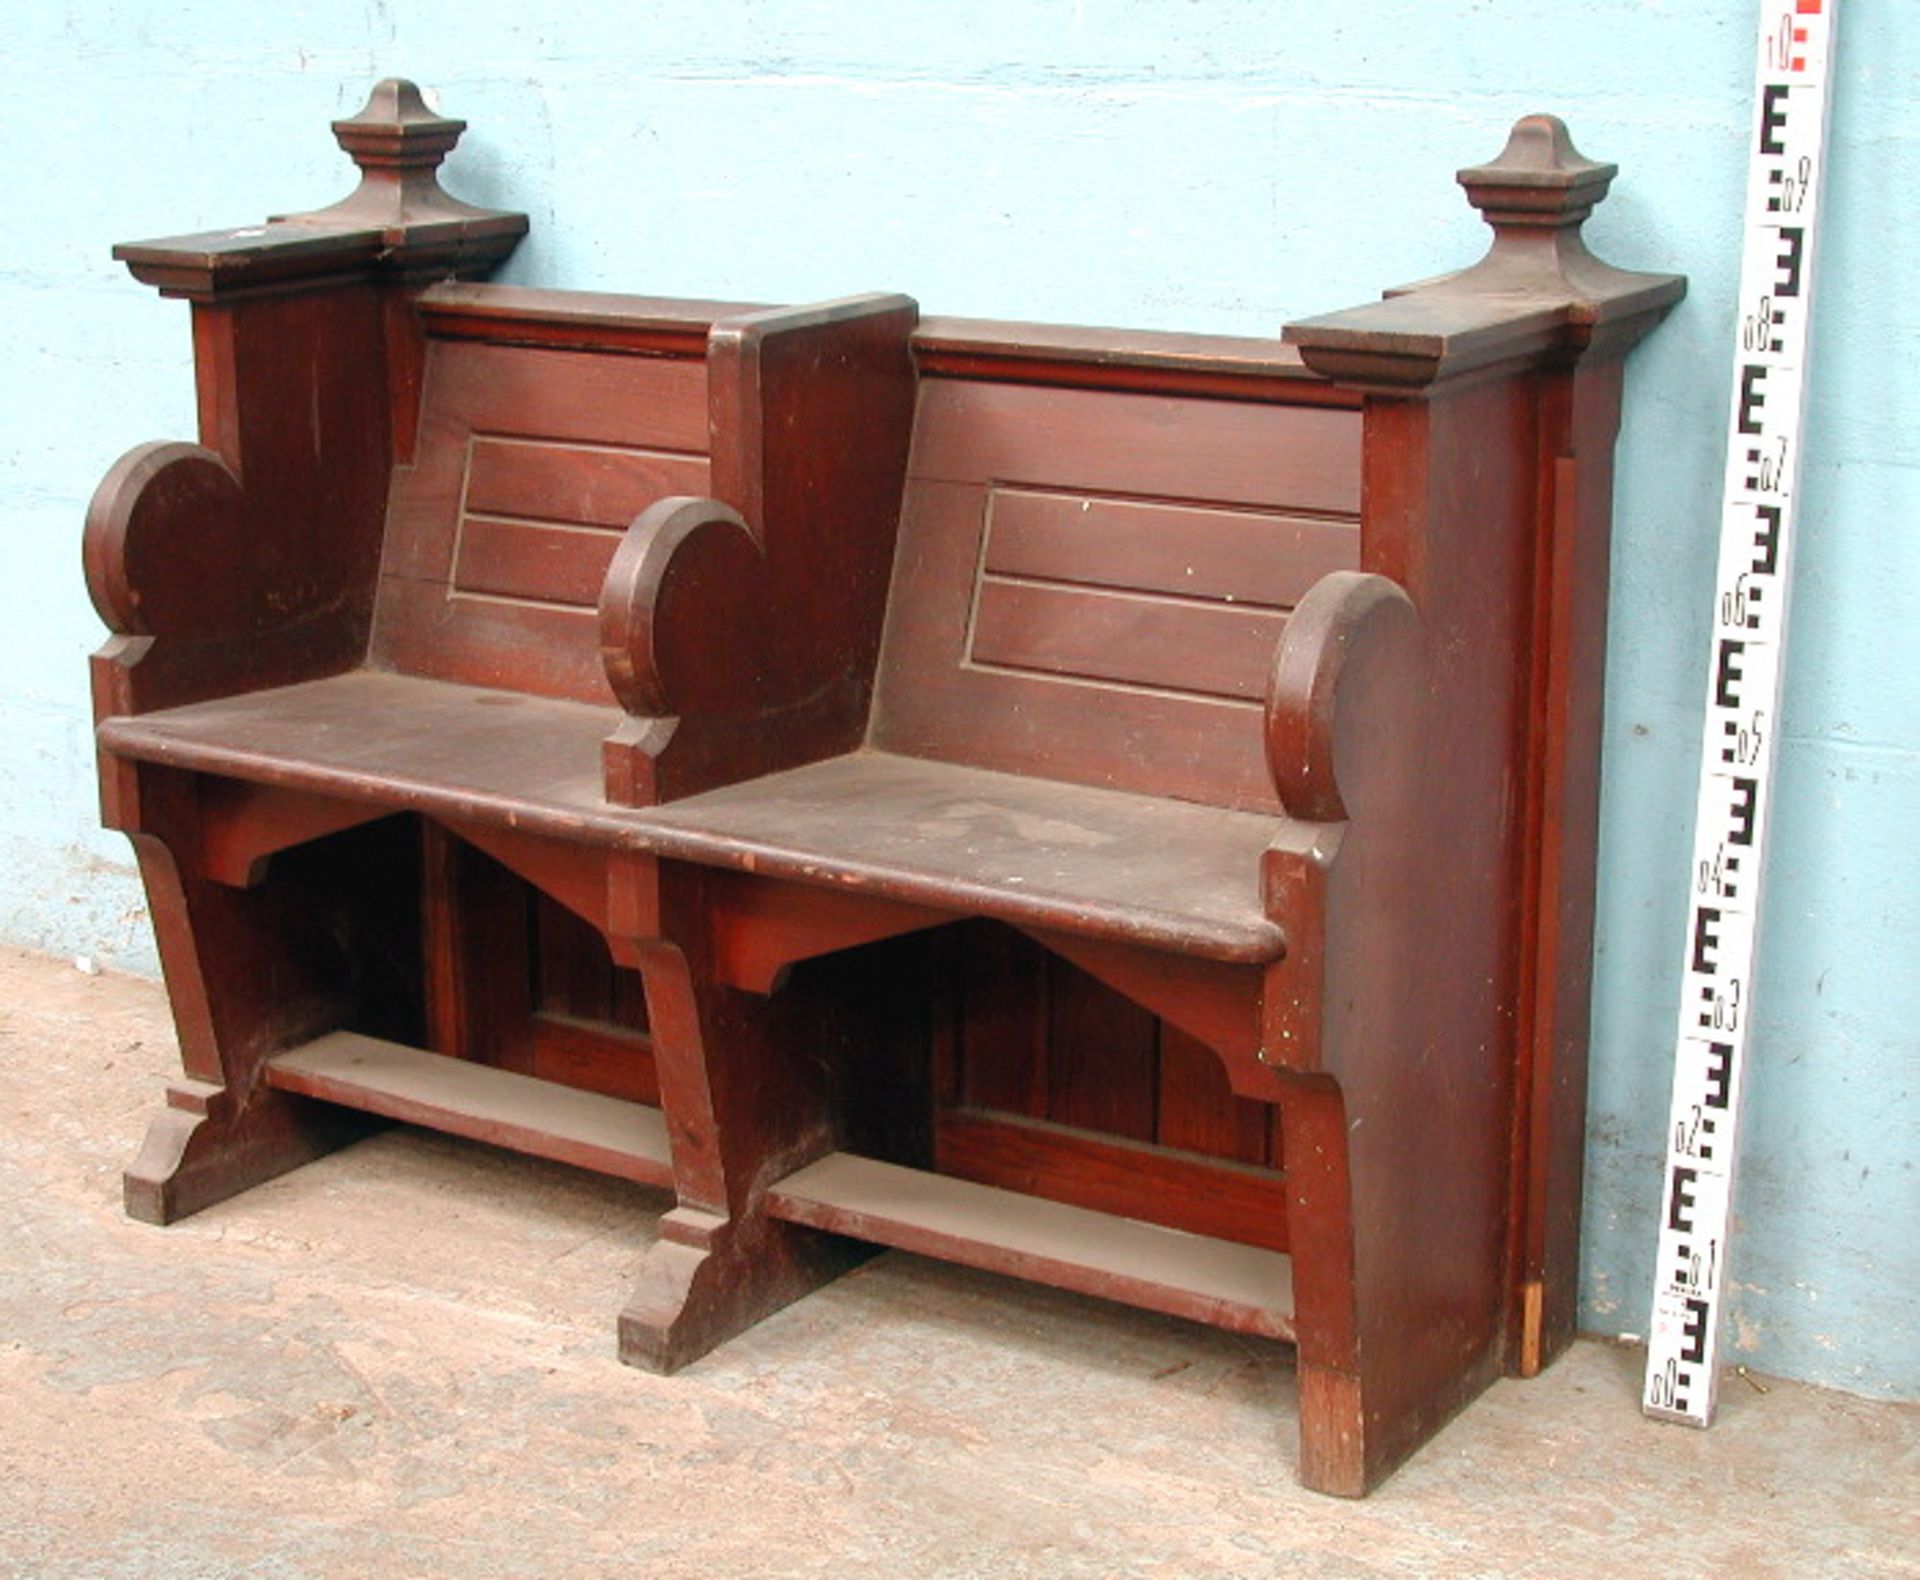 *PITCH PINE DOUBLE CLERGY SEAT. DARK VARNISH WITH SEAT SEPARATOR AND FINIALS, 1875.